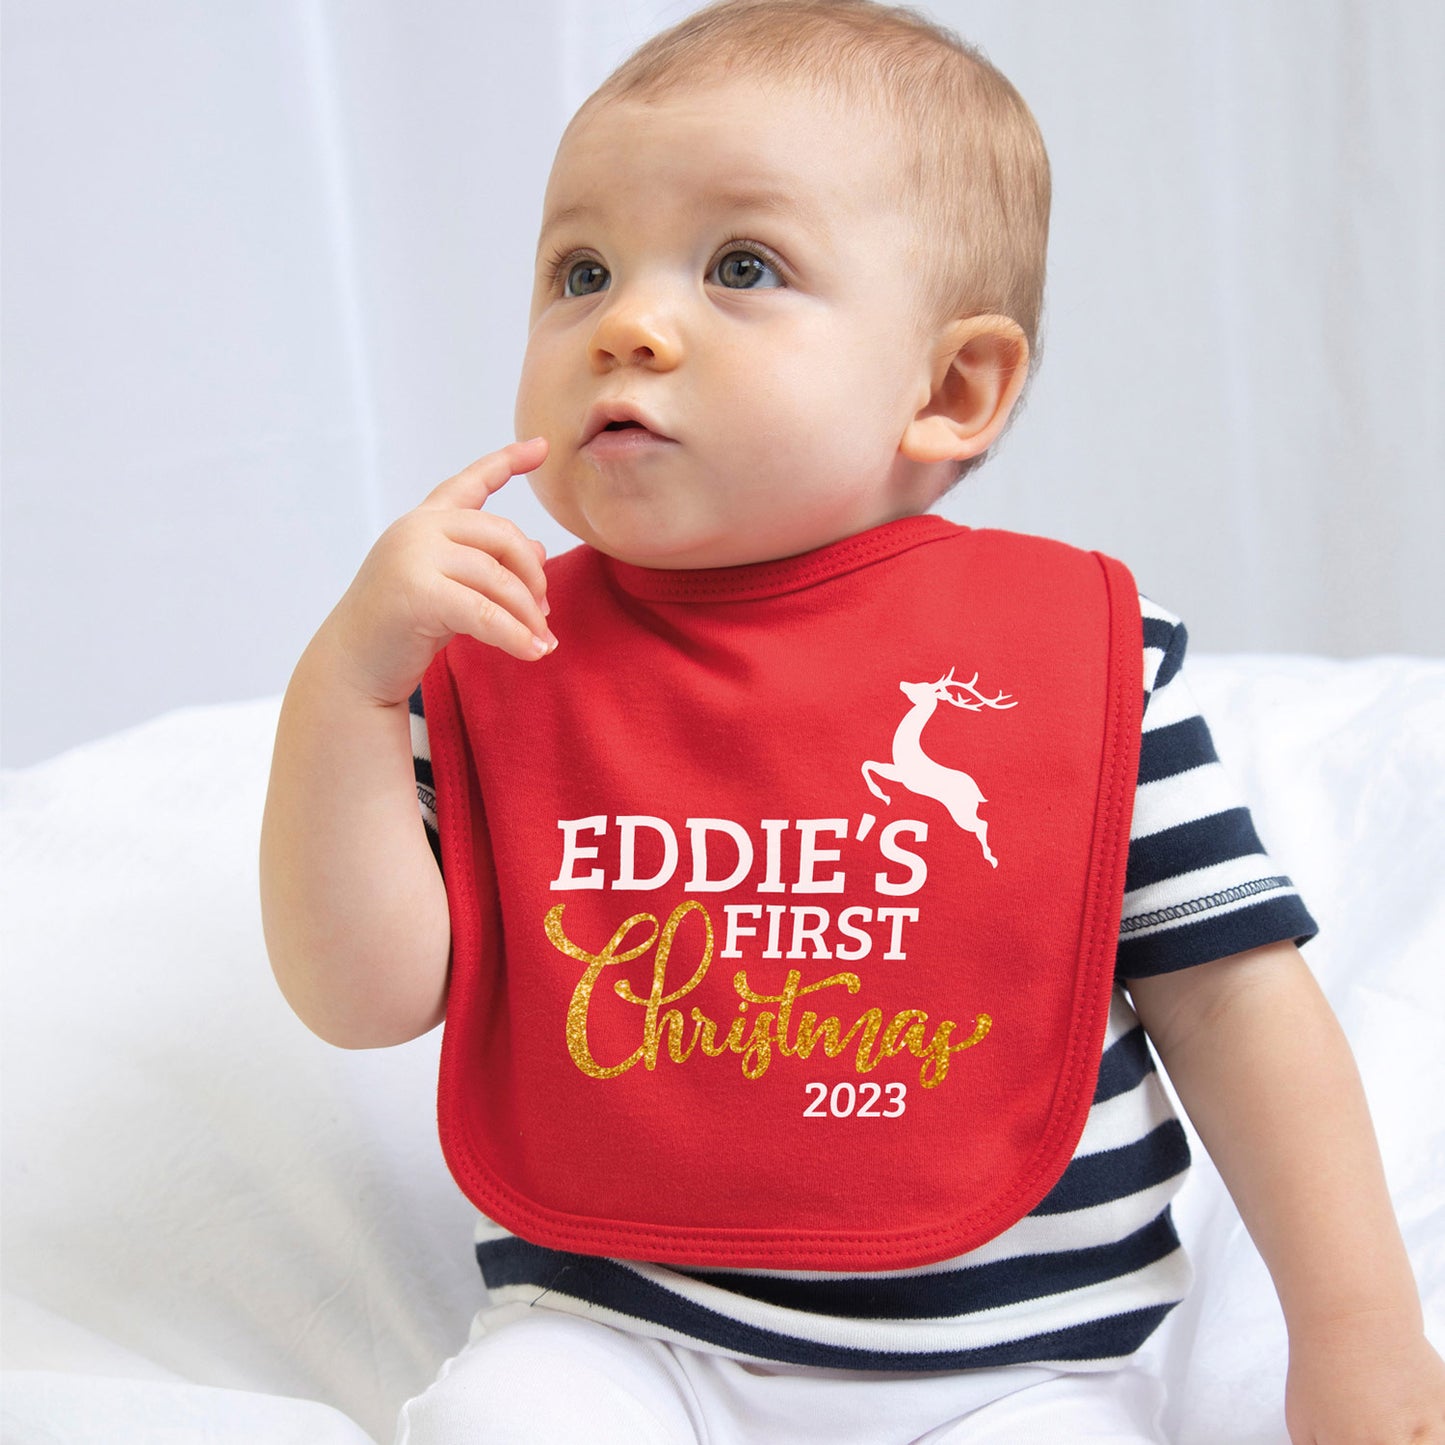 Baby's First Christmas Bib with gold glitter design